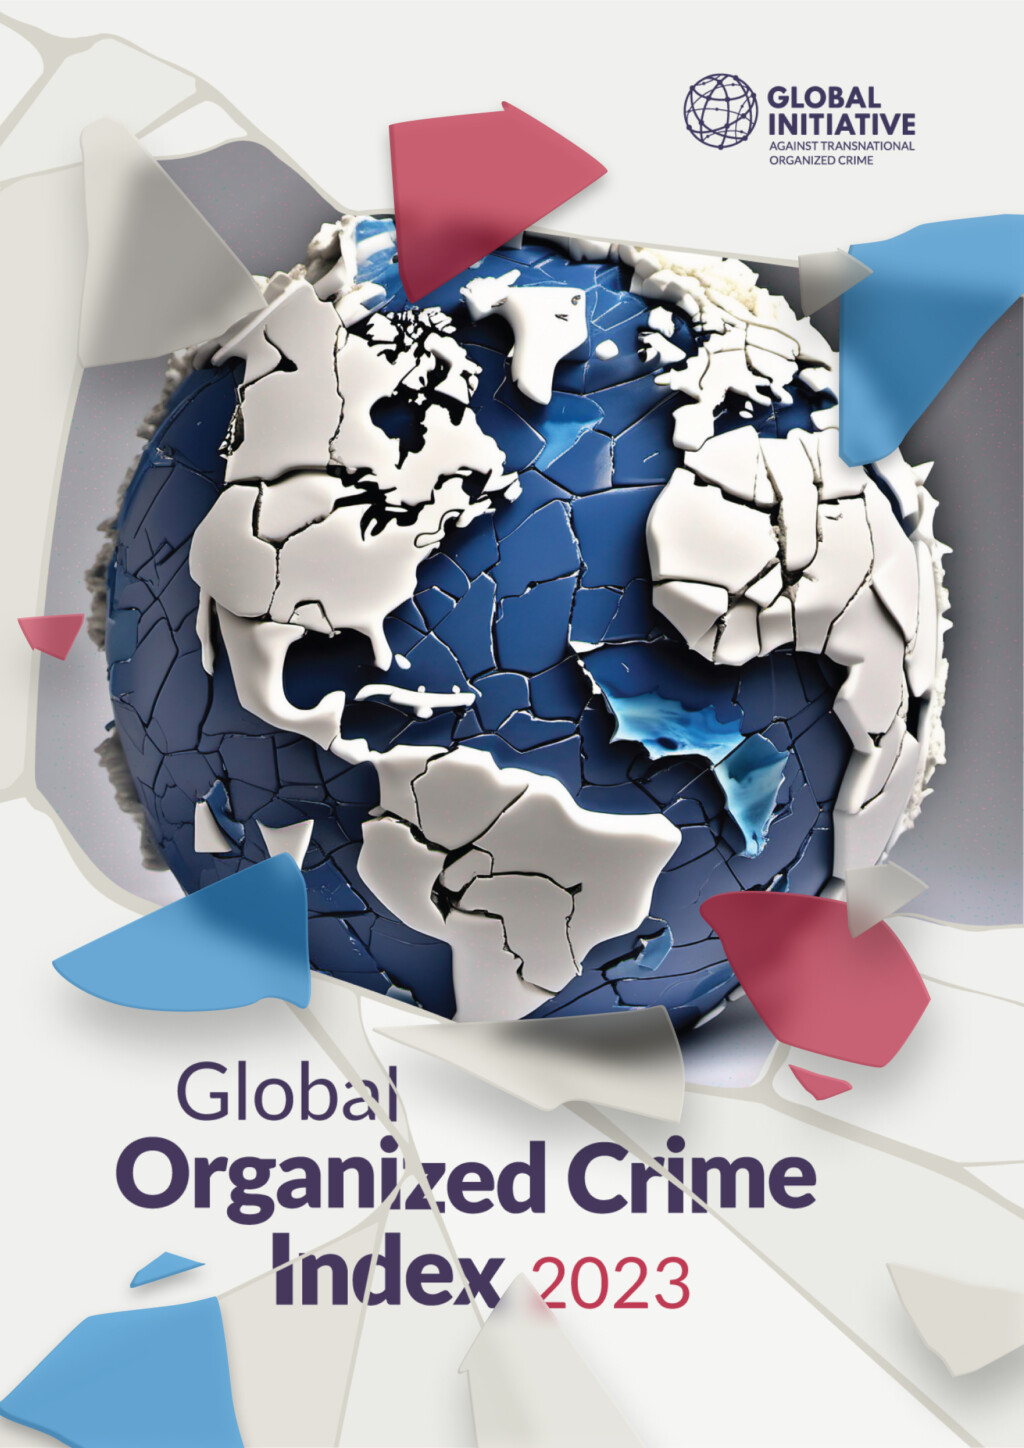 The Global Organized Crime Index 2023